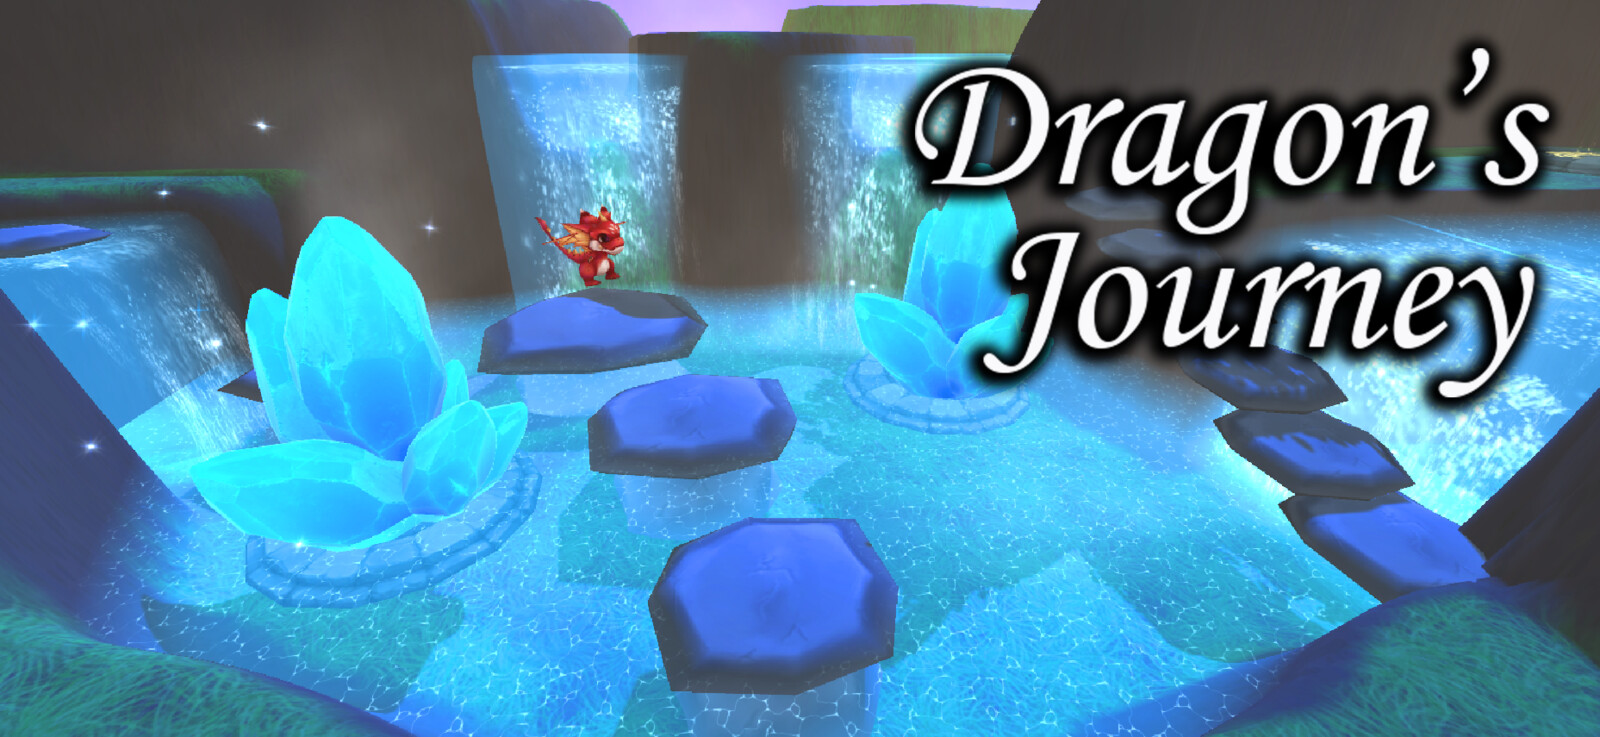 Dragon’s Journey is a 3D platforming exploration game where the player is Ruby, a little red dragon who is teleporting around the magical land in order to gather all the brightly colored gems scattered around the world.